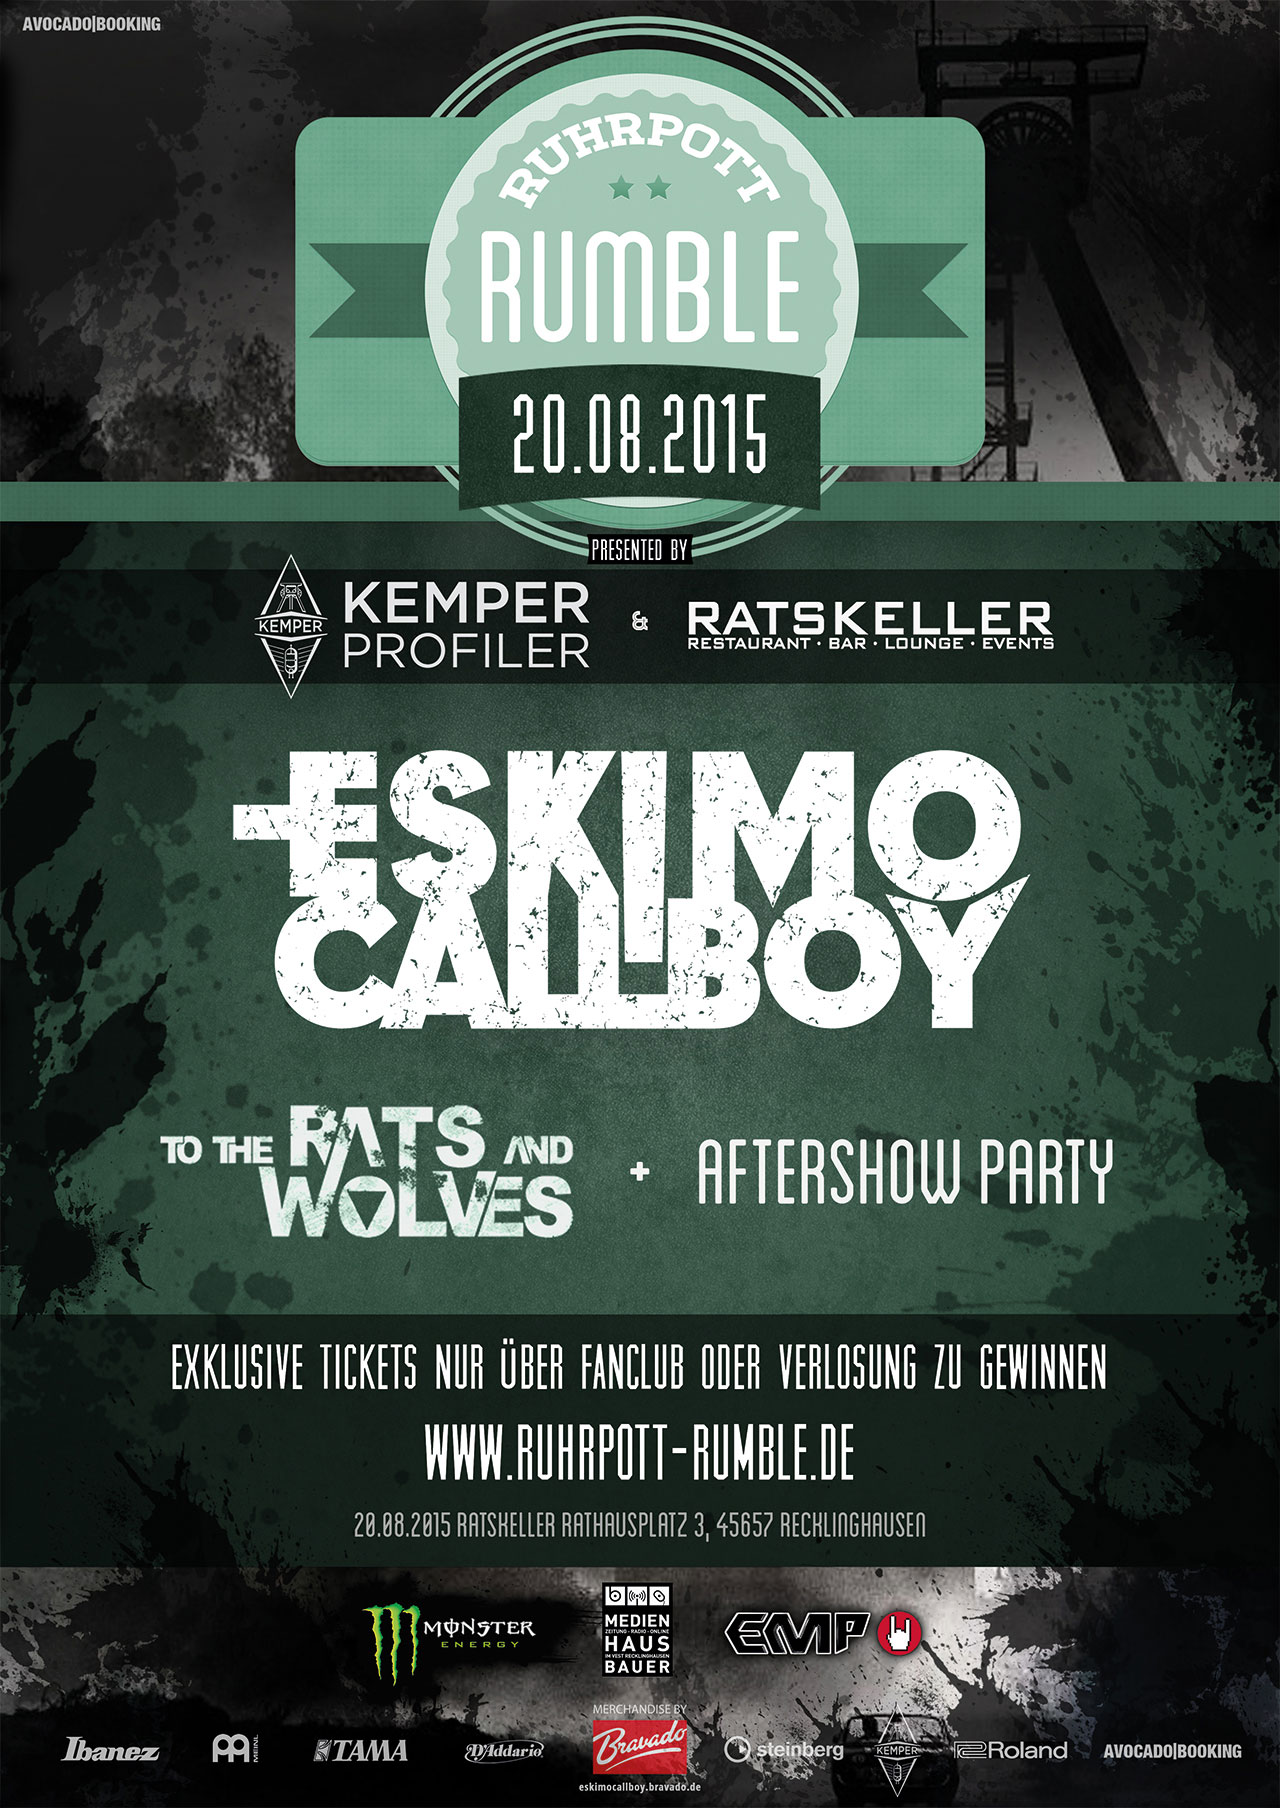 Ruhrpott Rumble 2015: Eskimo Callboy + To the Rats and Wolves + Aftershow Party am 20.08.2015 im Ratskeller in Recklinghausen